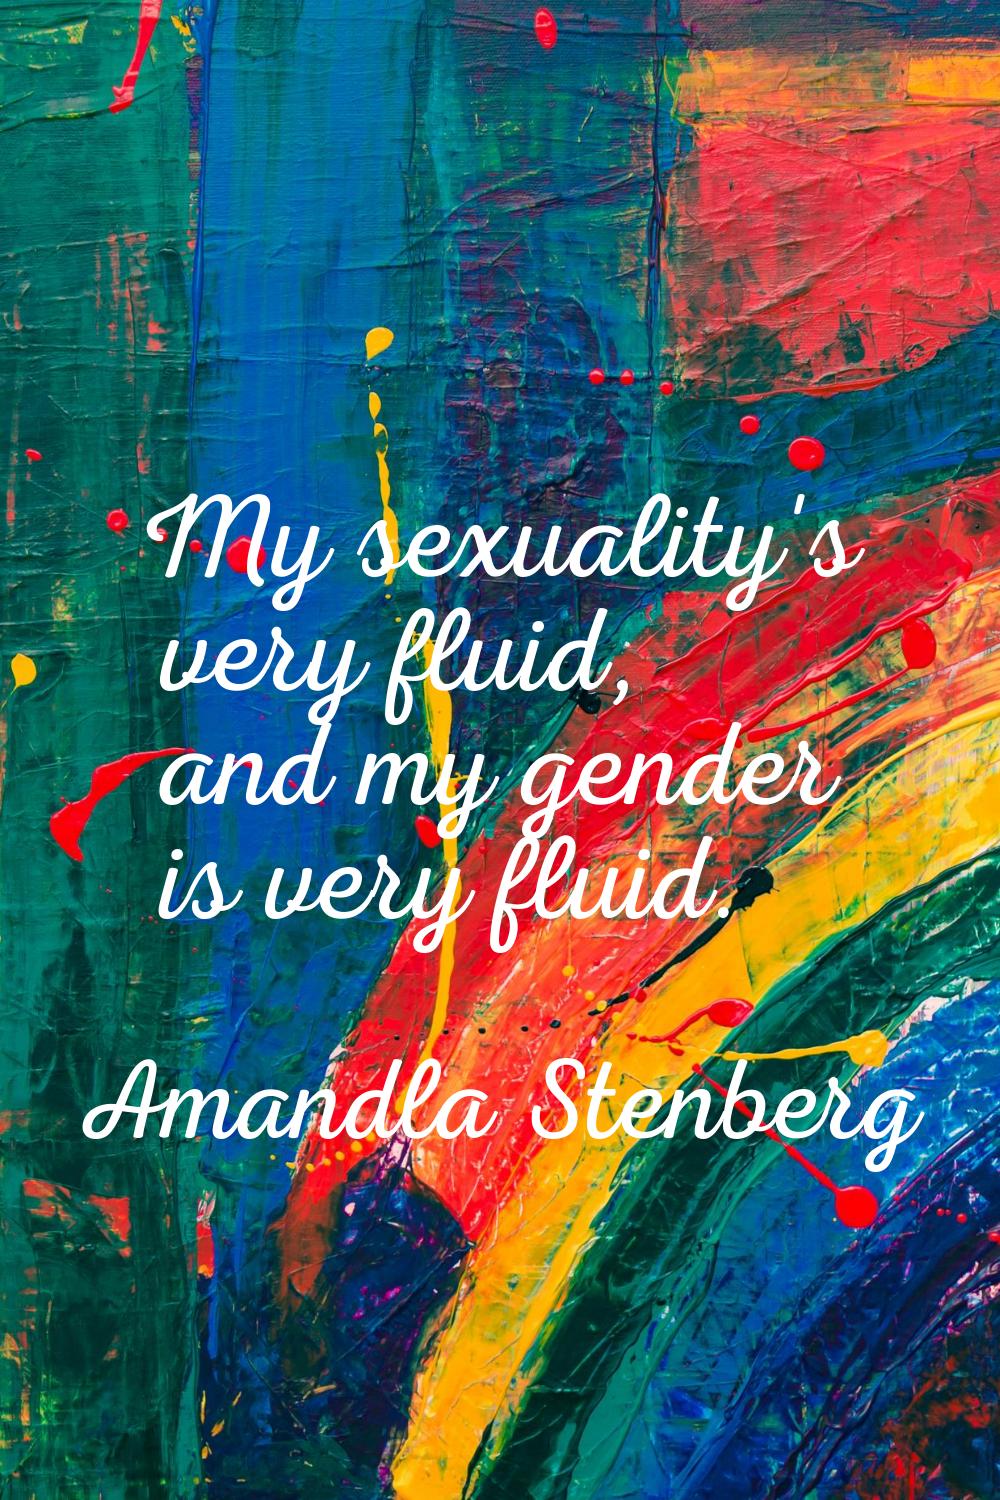 My sexuality's very fluid, and my gender is very fluid.